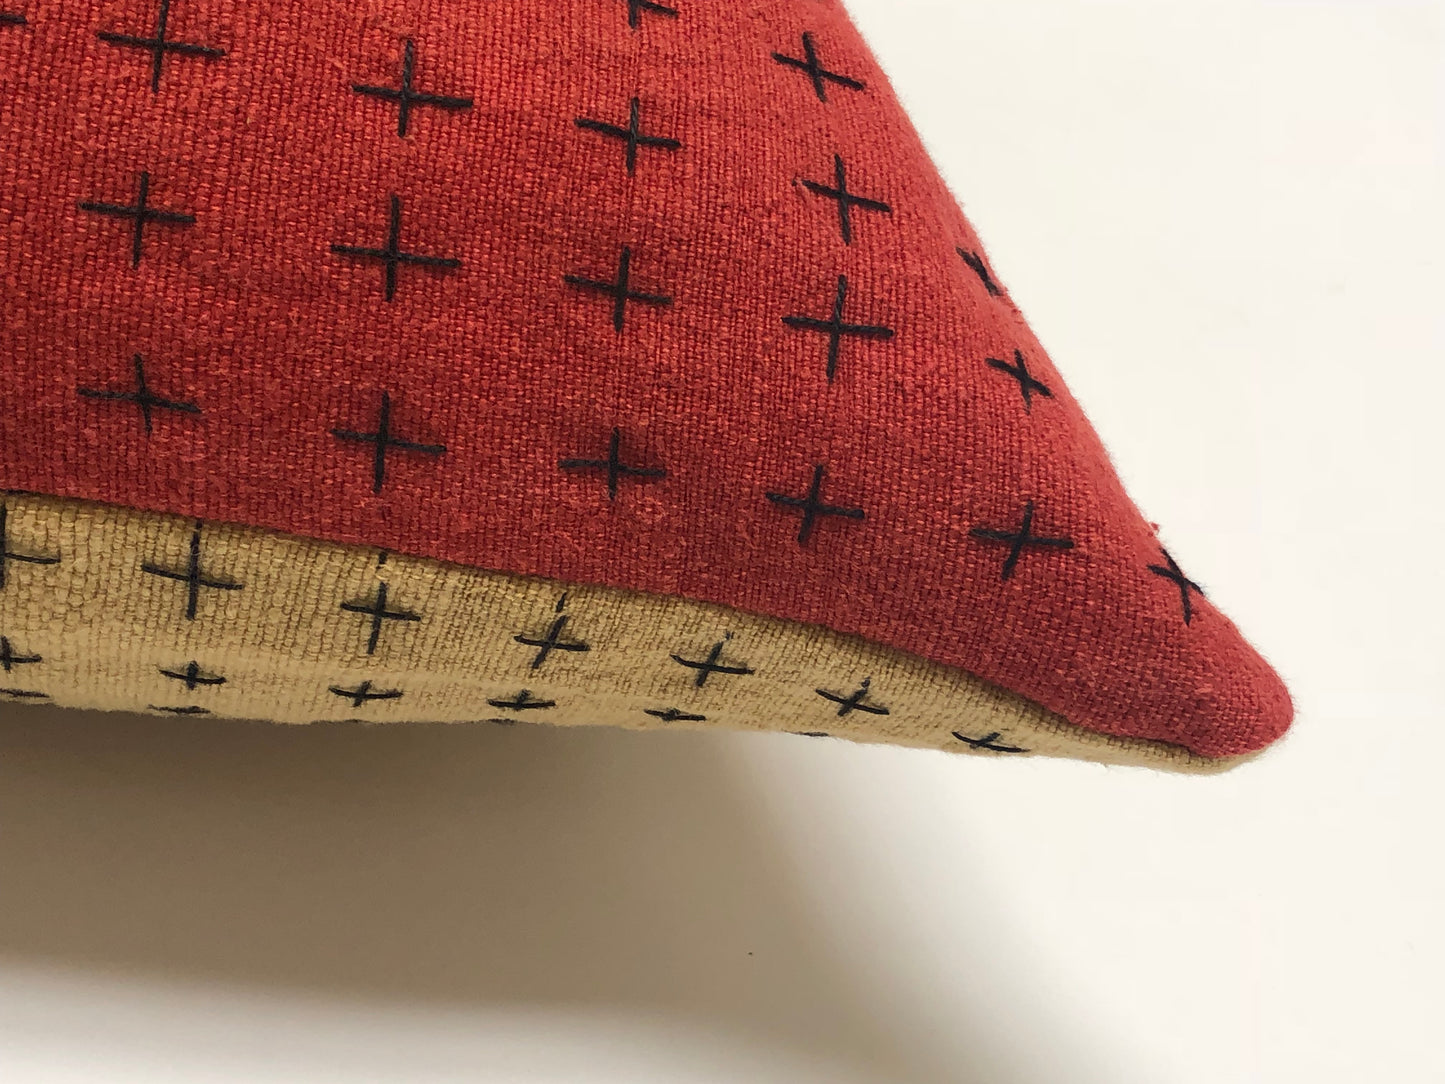 Madder & Mustard Pillow Cover 18x18in